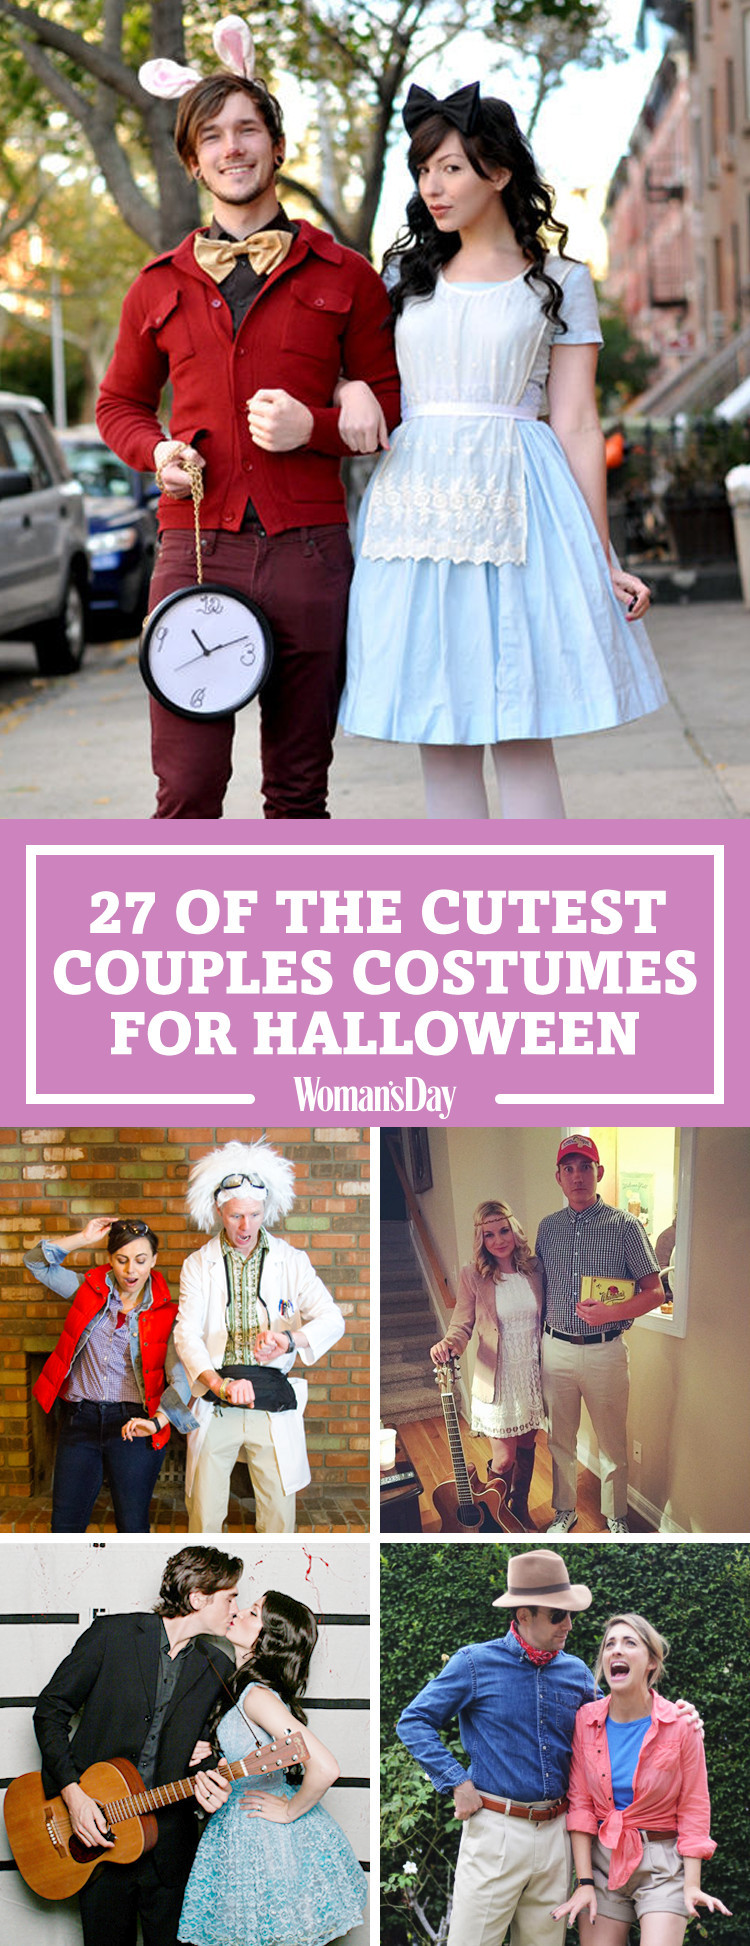 Cute Halloween Costume Ideas For Couples
 50 Cute Couples Halloween Costumes 2017 Best Ideas for